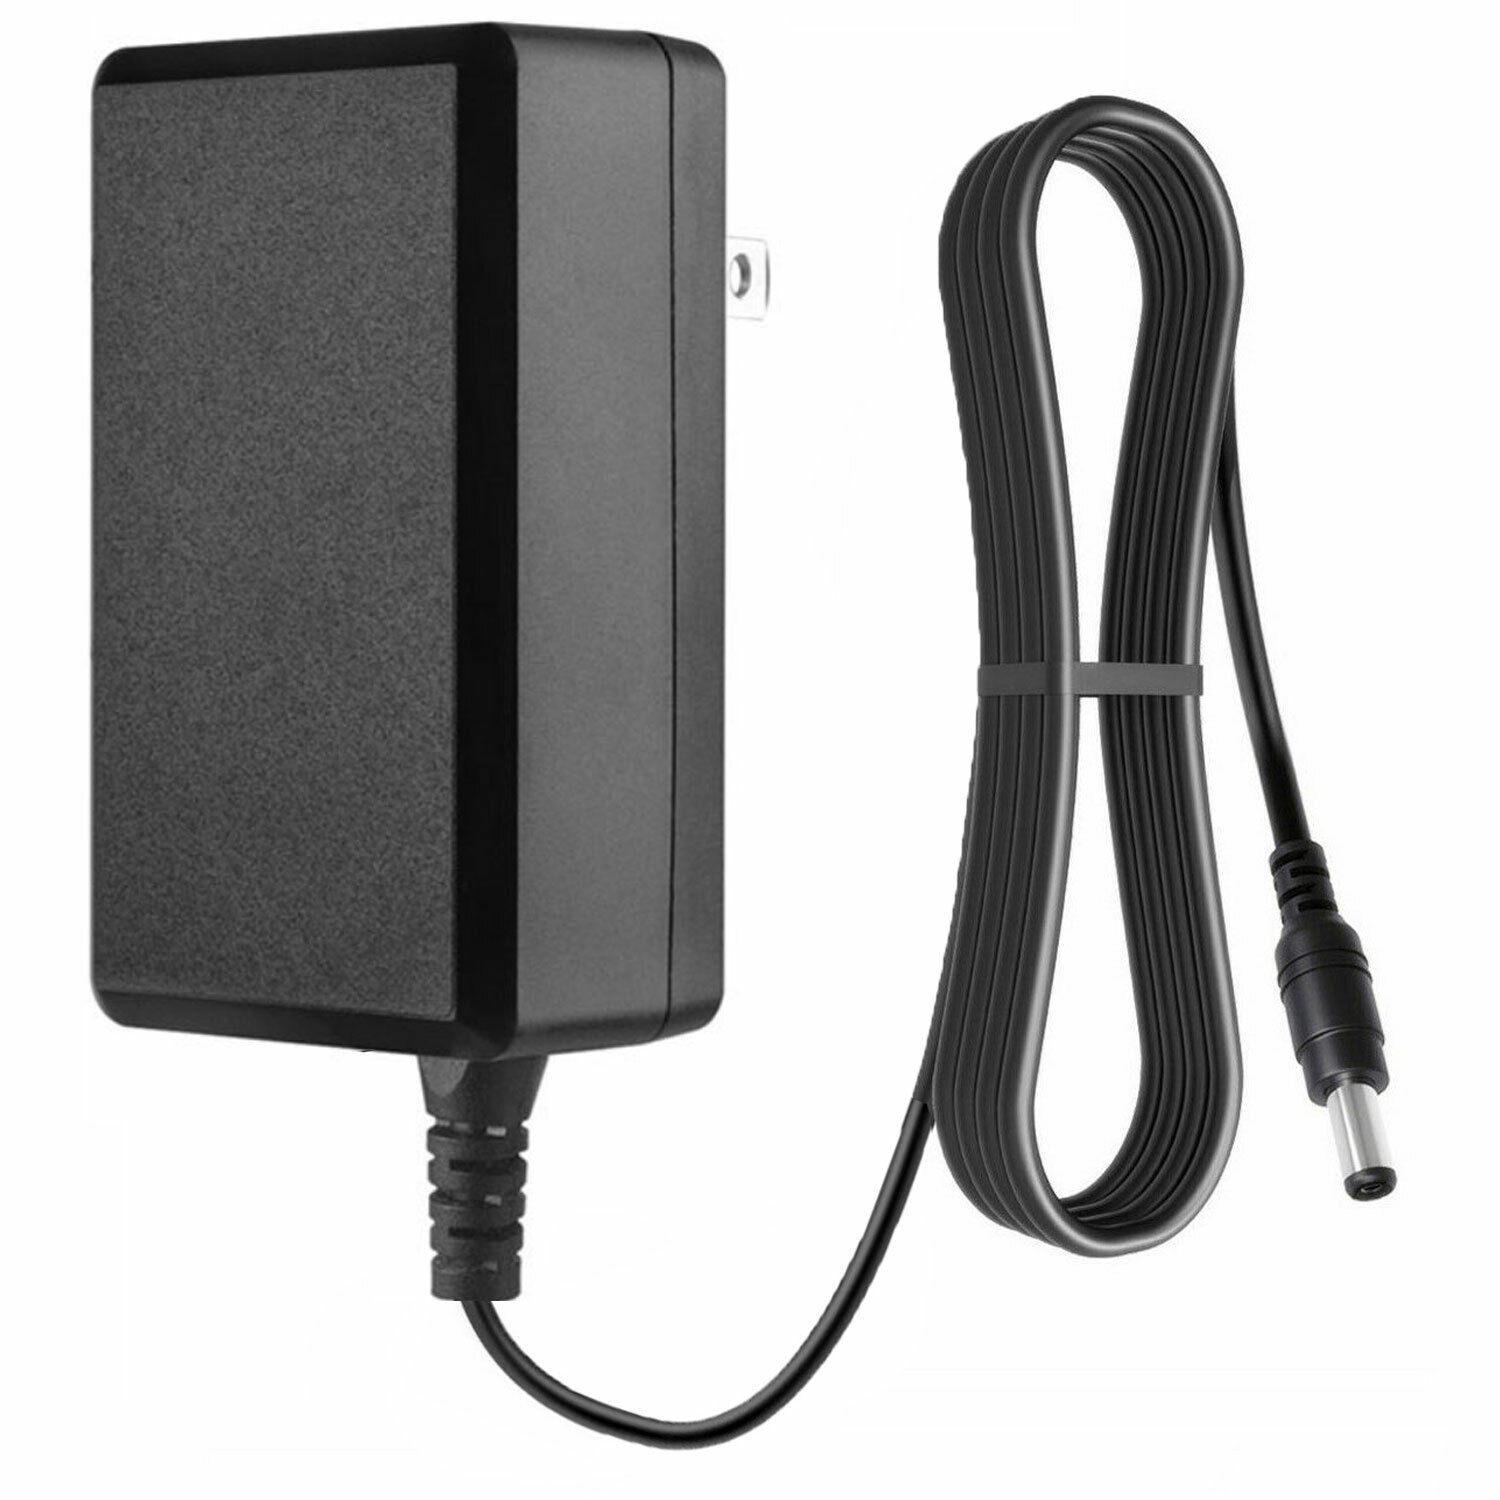 AC-DC Adapter for Fairway VE50-150A VE50150A Switching Power Supply Cord Charger Specifications: Type: AC to DC Standar